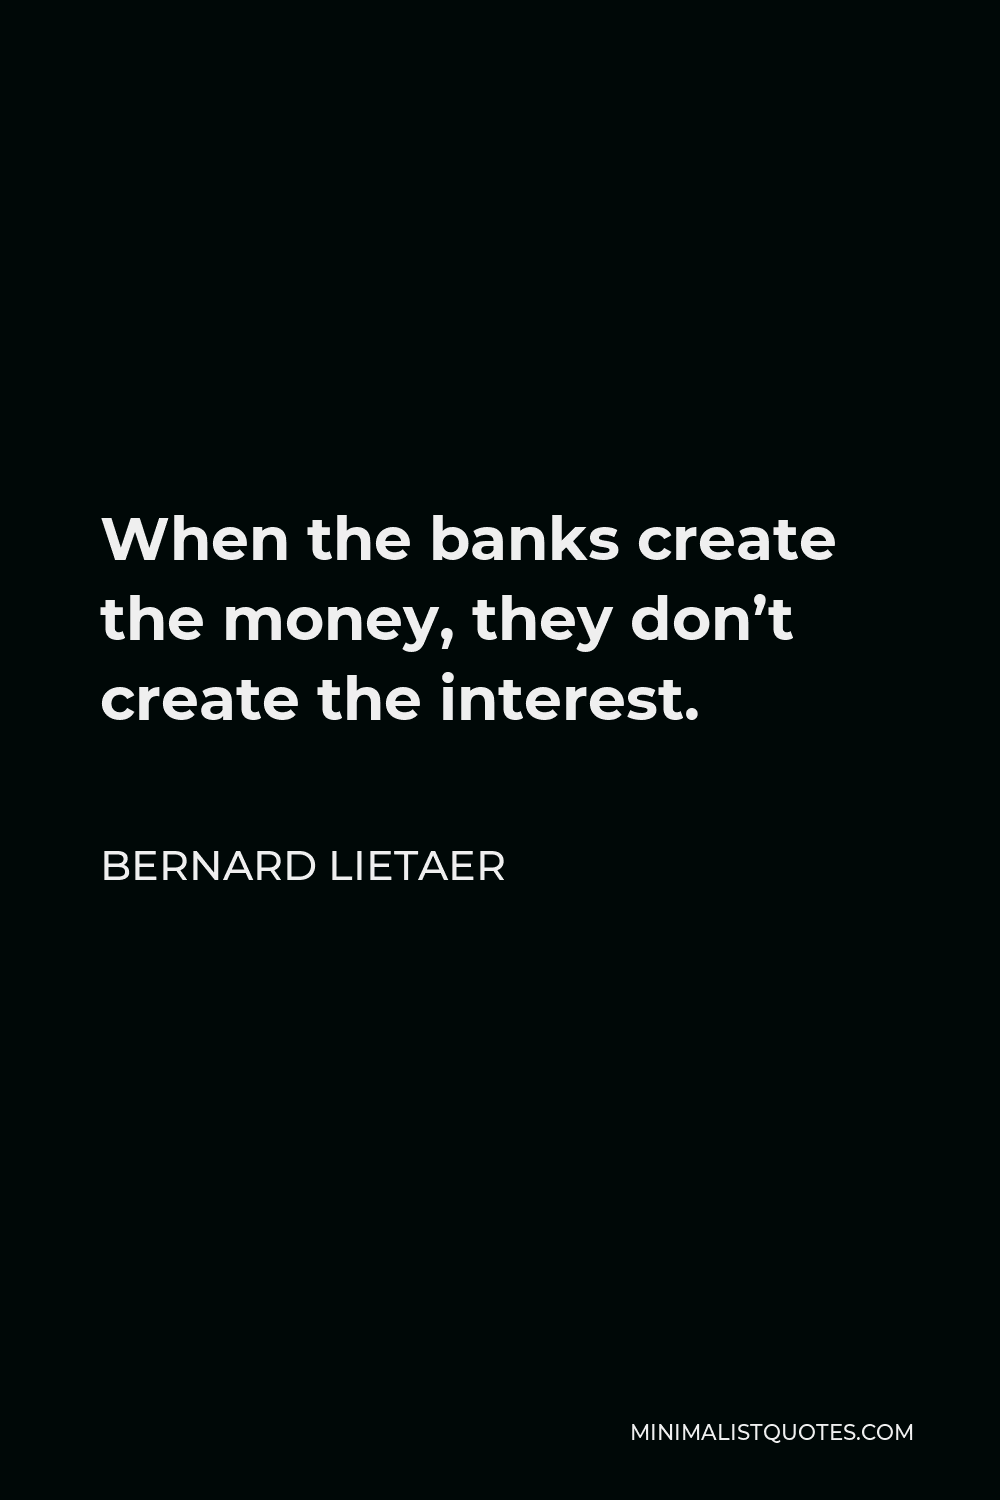 Bernard Lietaer Quote - When the banks create the money, they don’t create the interest.